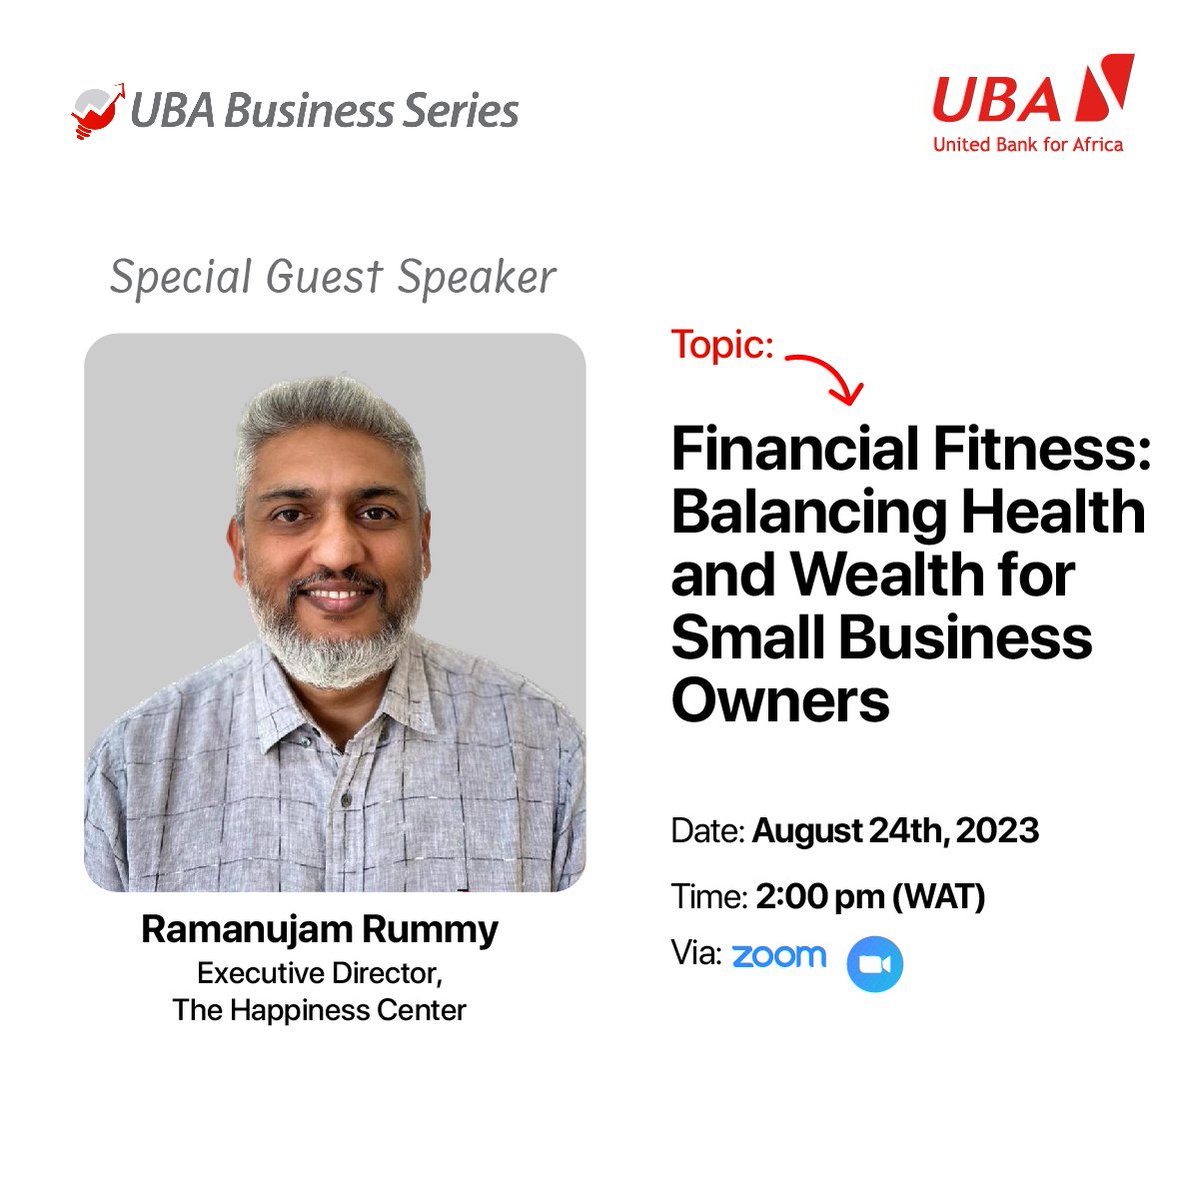 Join the @UBAGroup enlightening session happening live now here: ubagroup.zoom.us/webinar/regist…

And learn from expert like Ramanujam Rummy as he share key strategies for business success and maintaining good health. 

#UBABusinessSeries